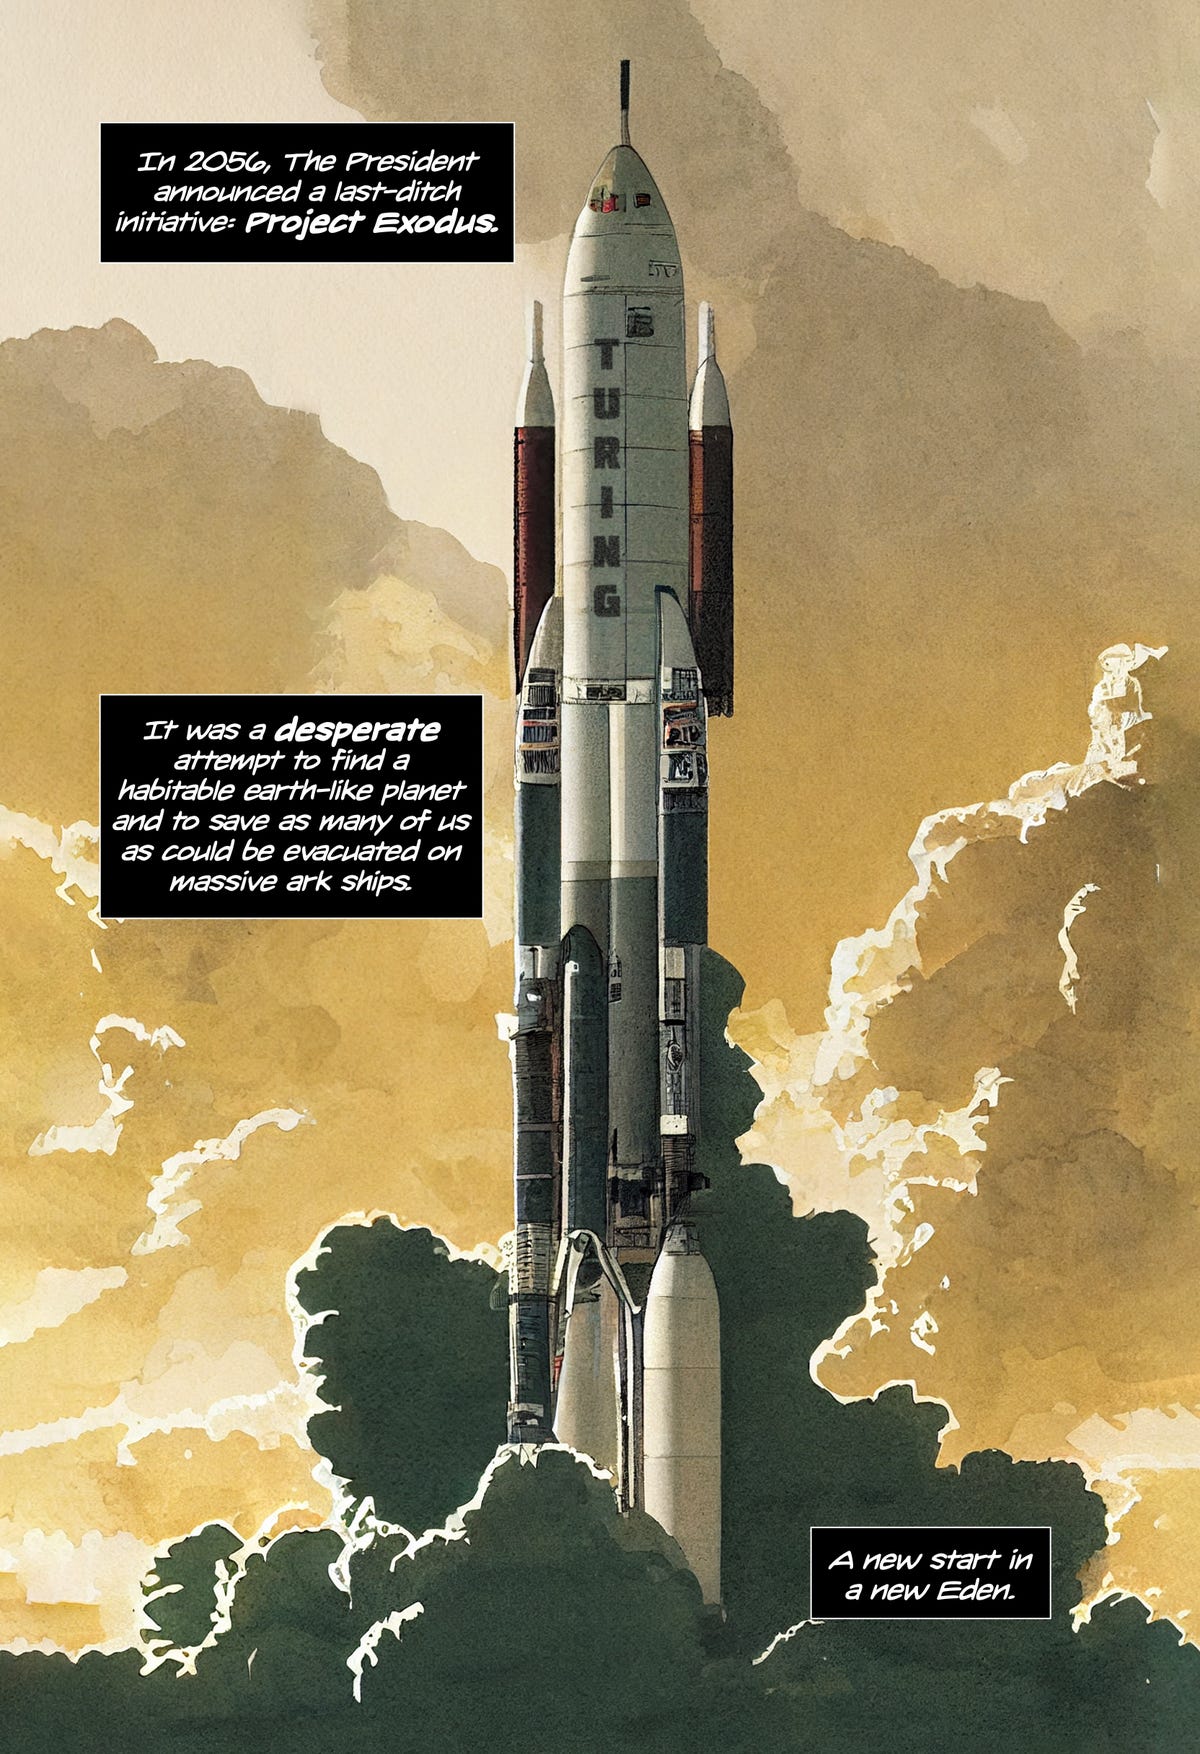 A page from The Exodus, showing rockets pointing upwards